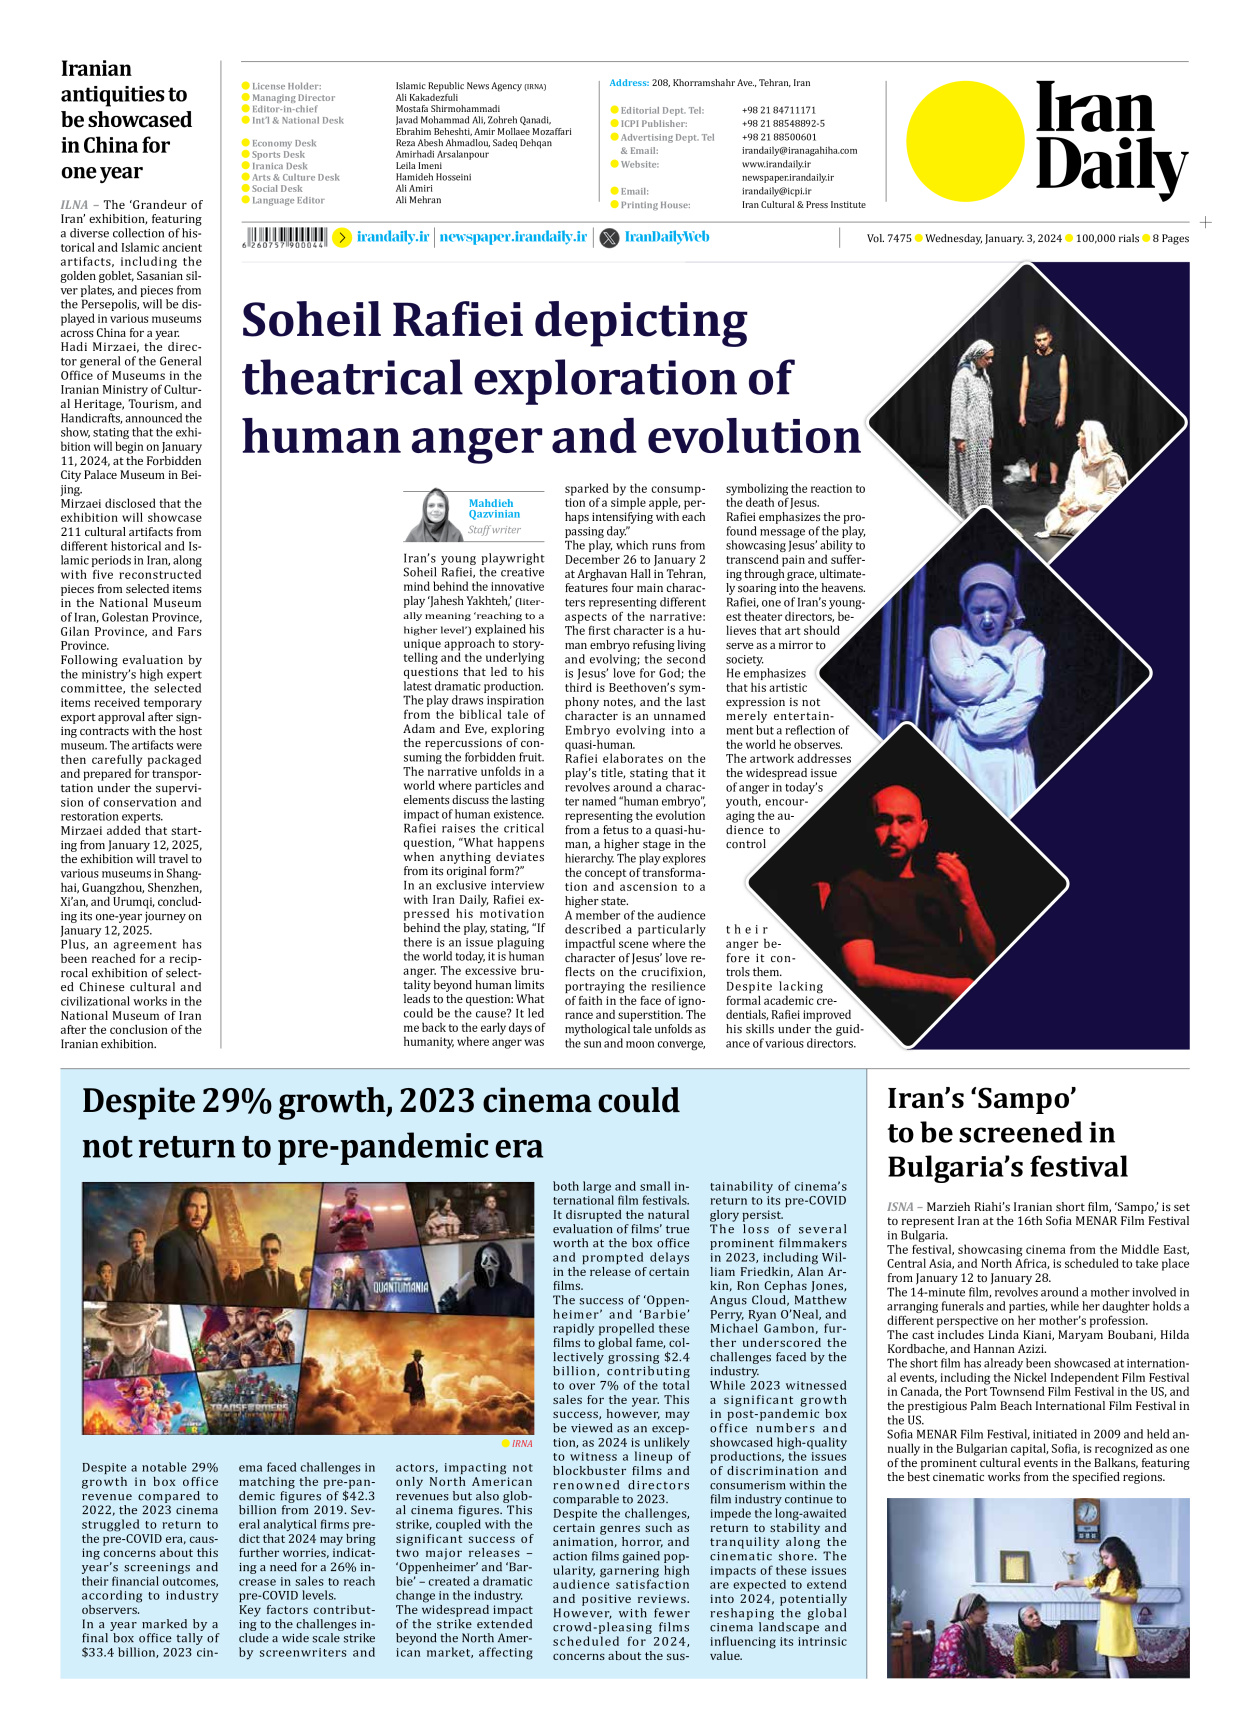 Iran Daily - Number Seven Thousand Four Hundred and Seventy Five - 03 January 2024 - Page 8